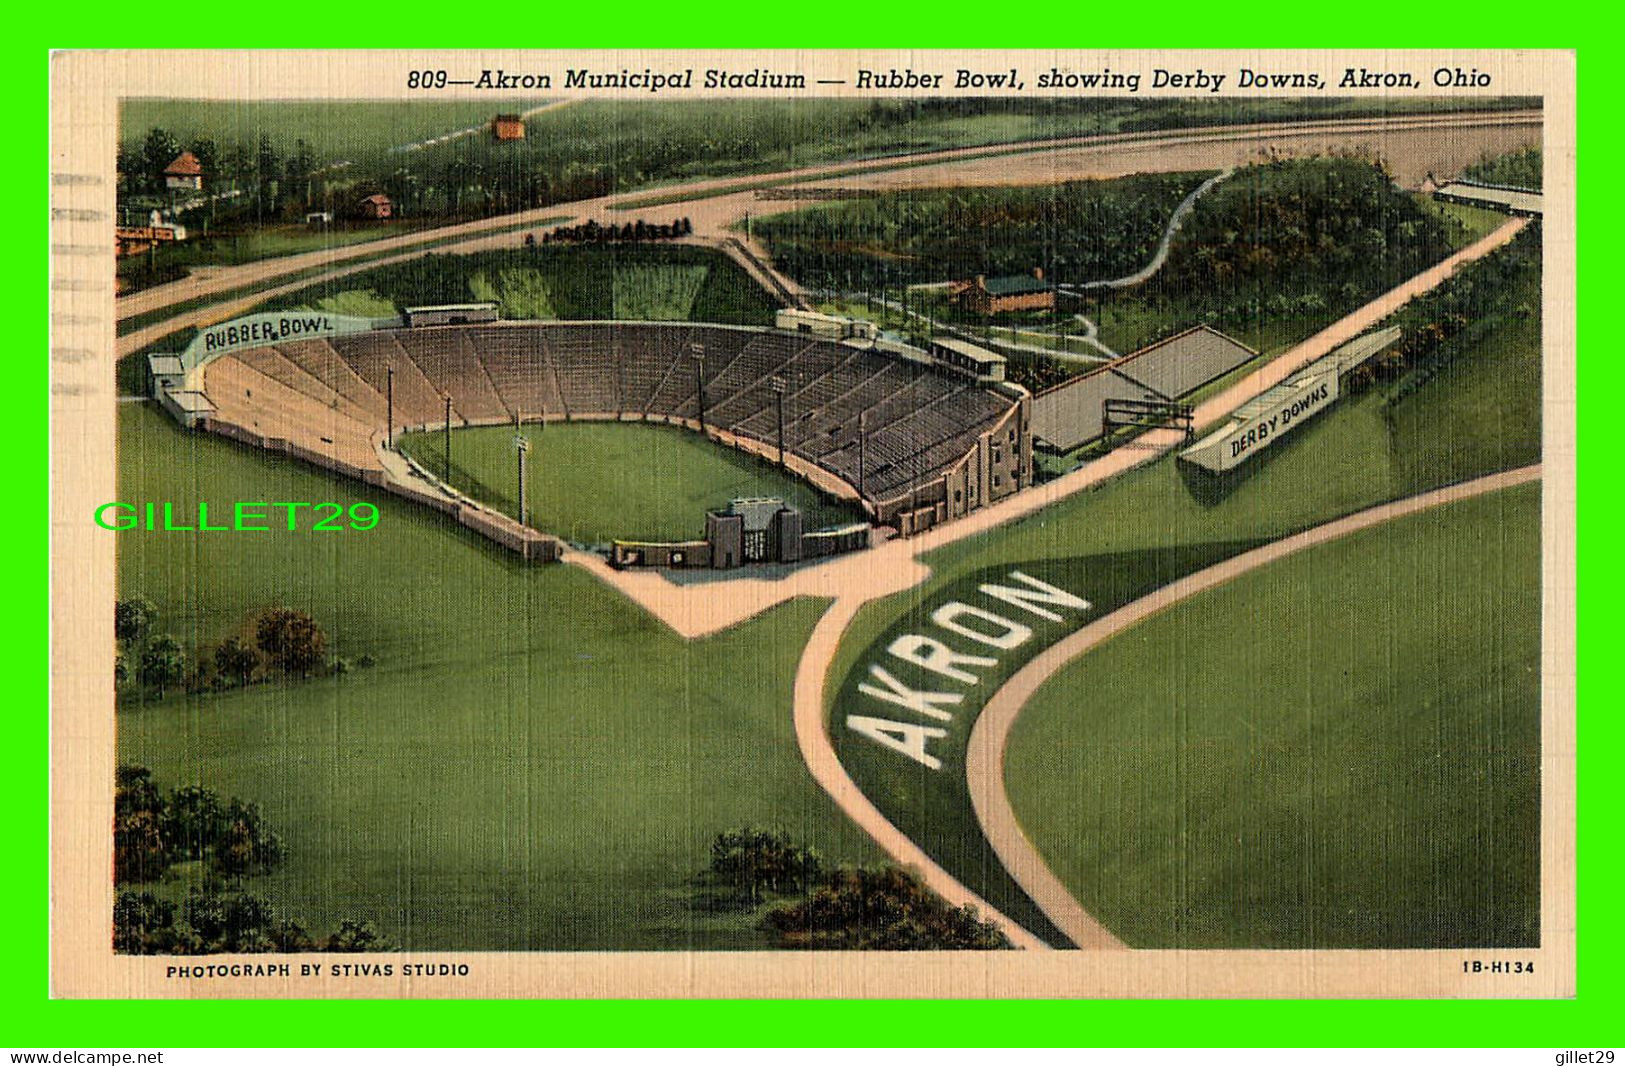 AKRON, OH - AKRON MUNICIPAL STADIUM - RUBBER BOWL SHOWING DERBY DOWNS - TRAVEL IN 1941 -  CENTRAL NEWS - - Akron